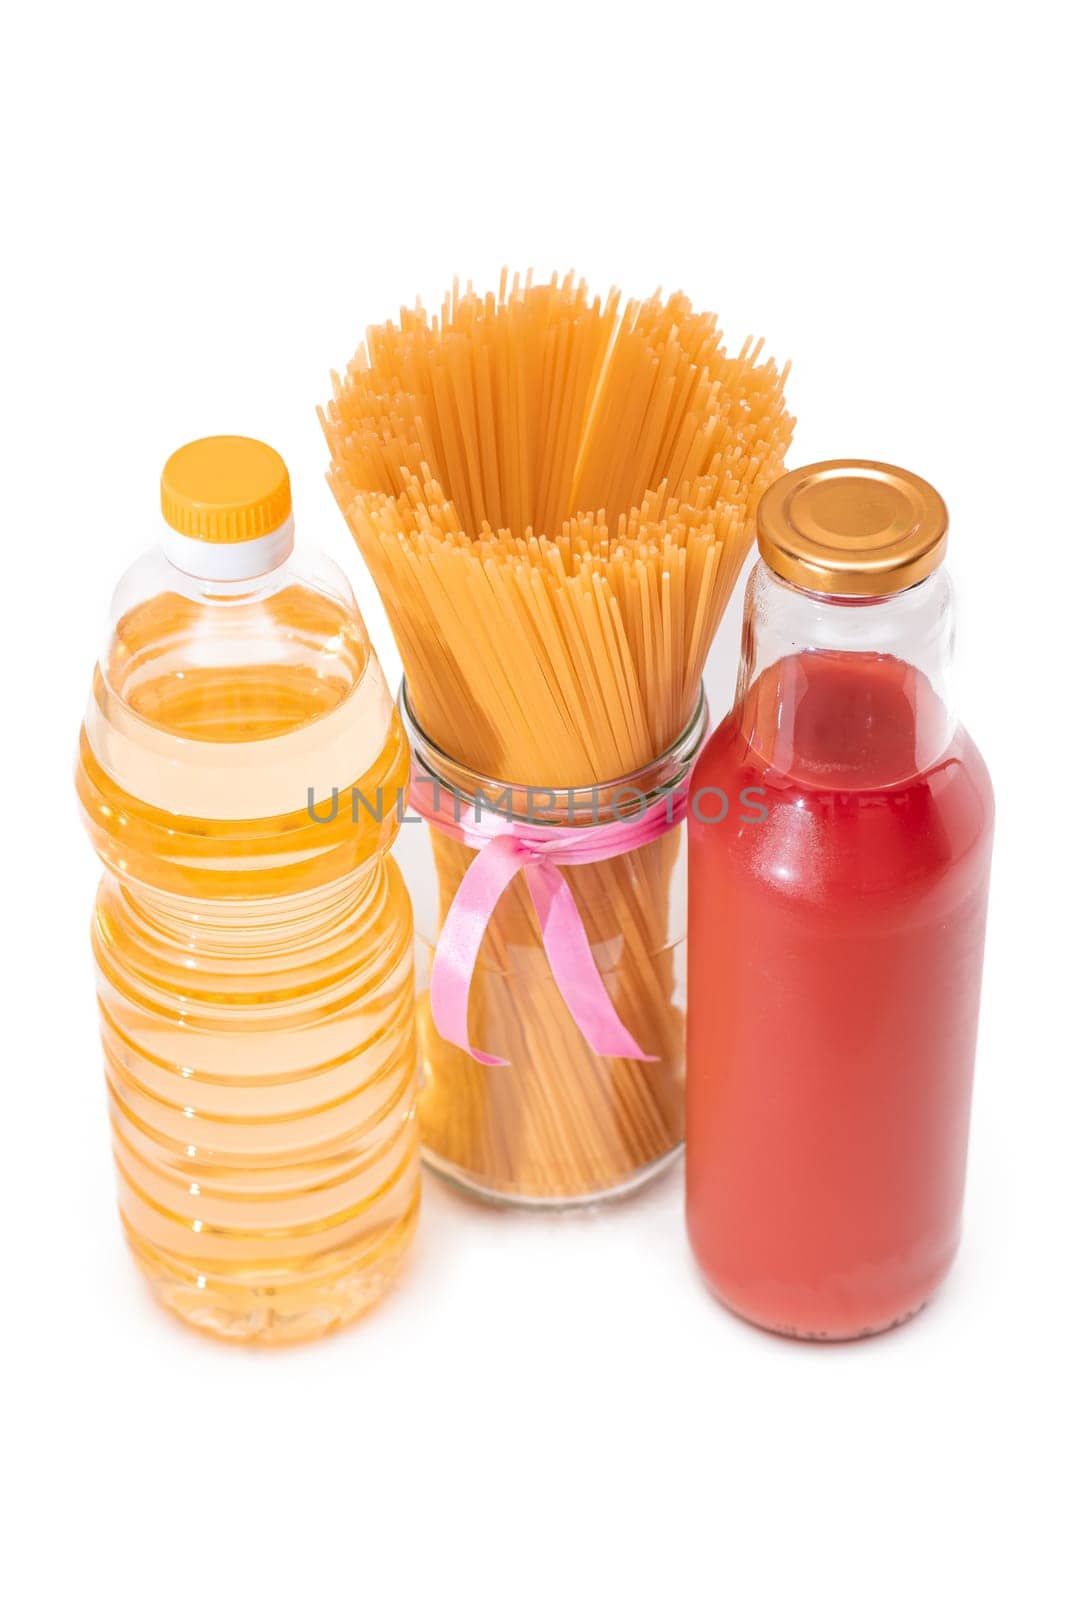 Food Reserves: Canned Food, Spaghetti, Tomato Juice, Pasta and Grocery - Isolated on White Background by InfinitumProdux